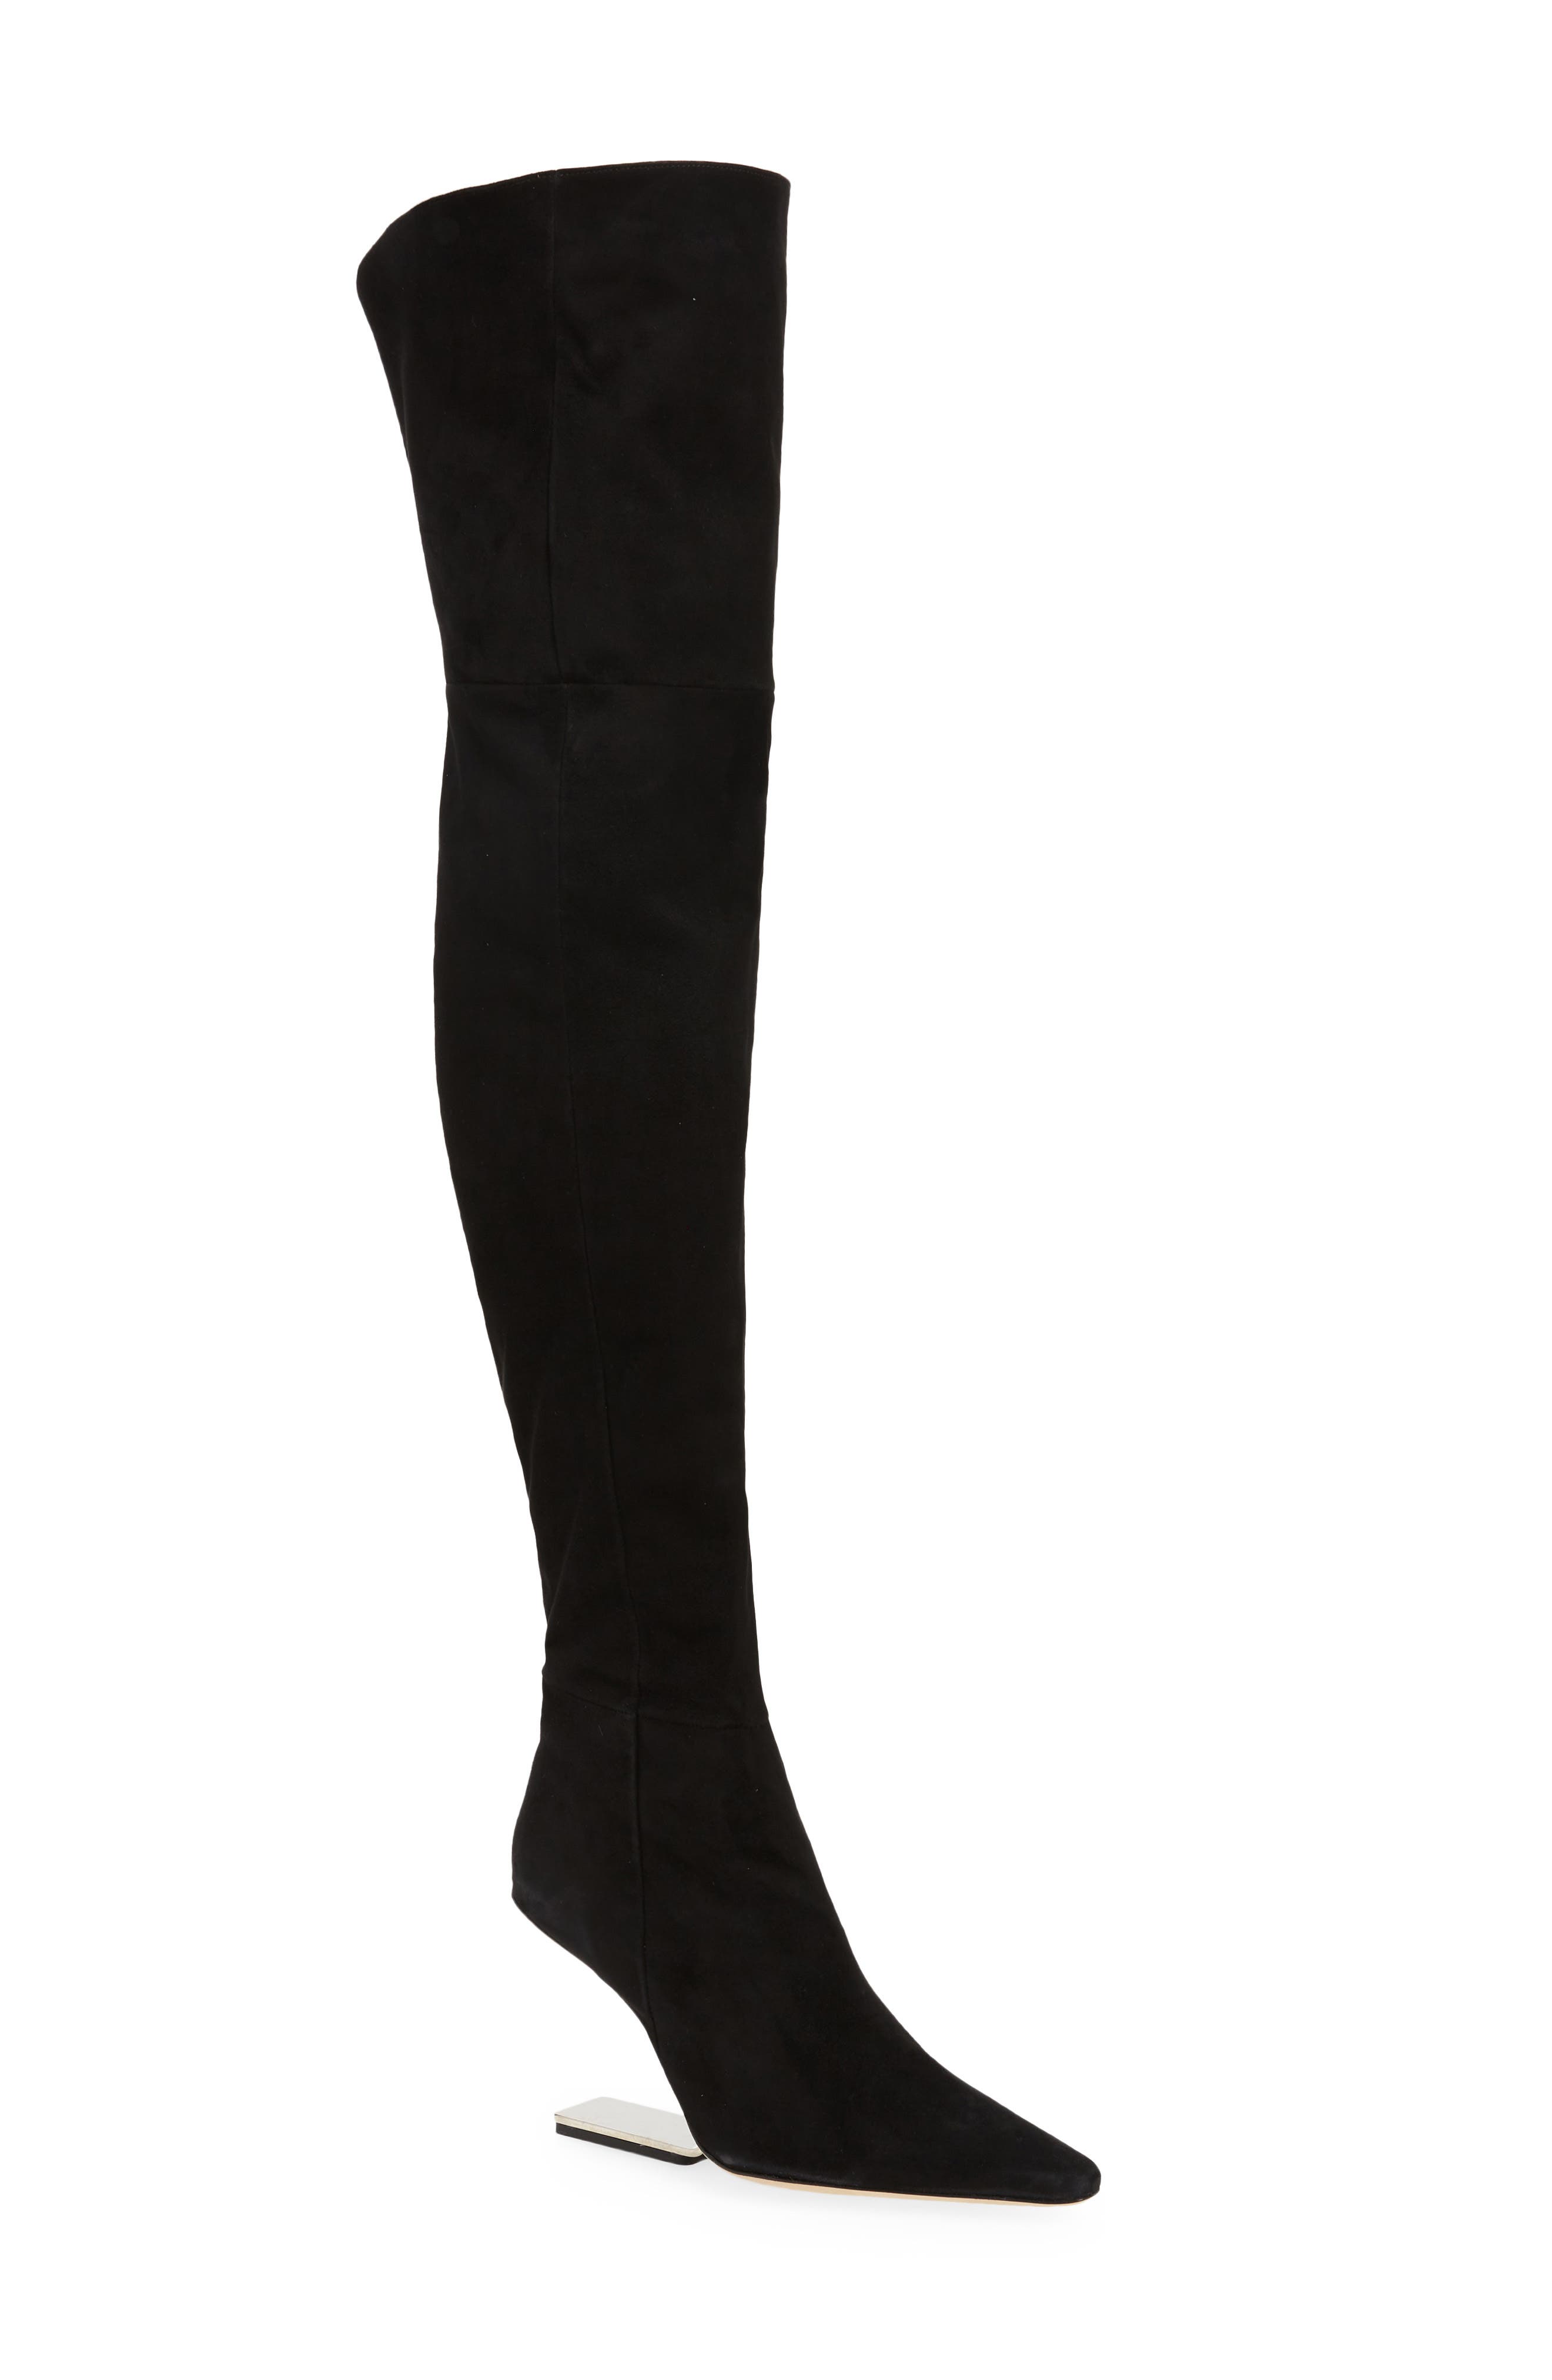 Cult Gaia Yasmina Over the Knee Boot in Black at Nordstrom